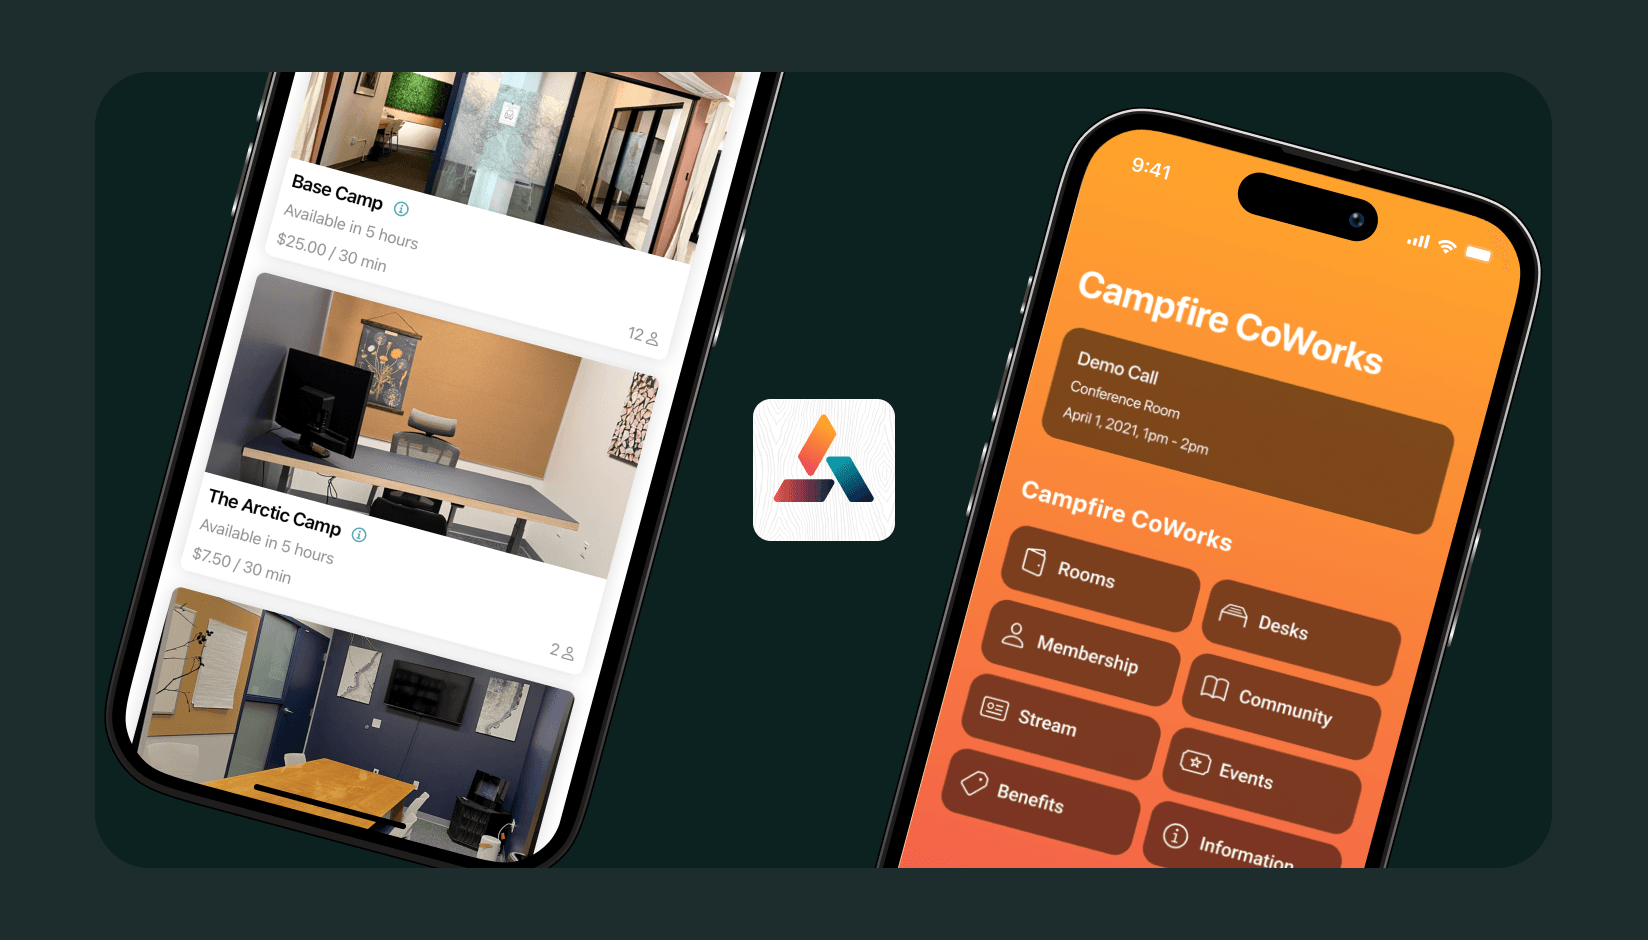 Campfire Coworks app developed by andcards